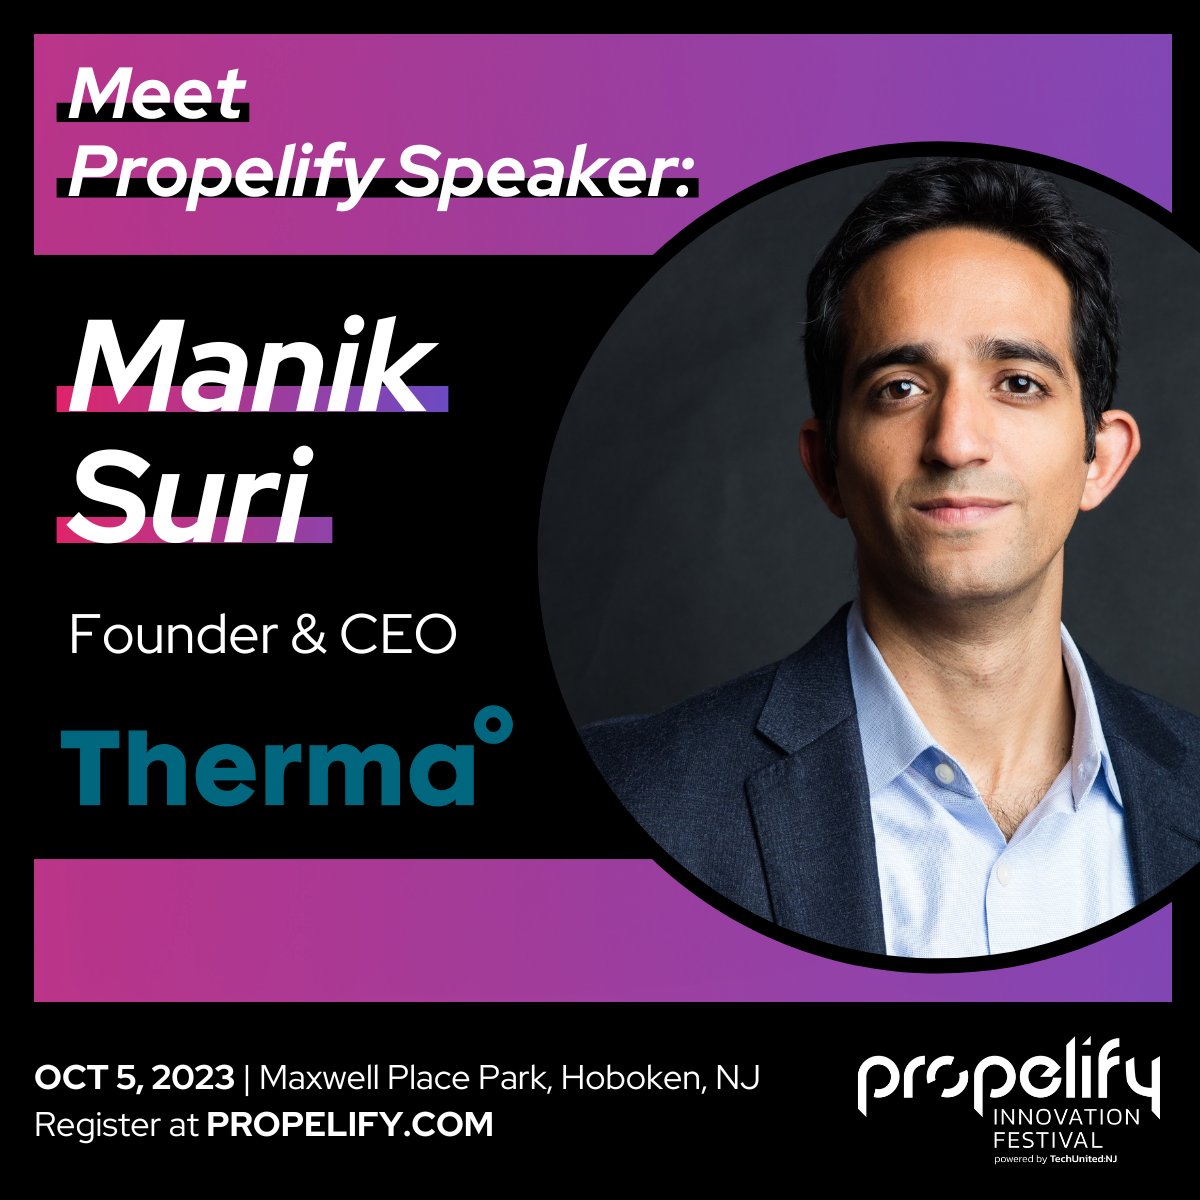 🎙️ Discover how Manik Suri, Founder and CEO of @HelloTherma, is revolutionizing refrigeration to combat climate change. Join us at the @propelify Innovation Festival on Oct 5th to hear his insights firsthand: propelify.com #LetsPropel #TechUnitedNJ #ClimateChange